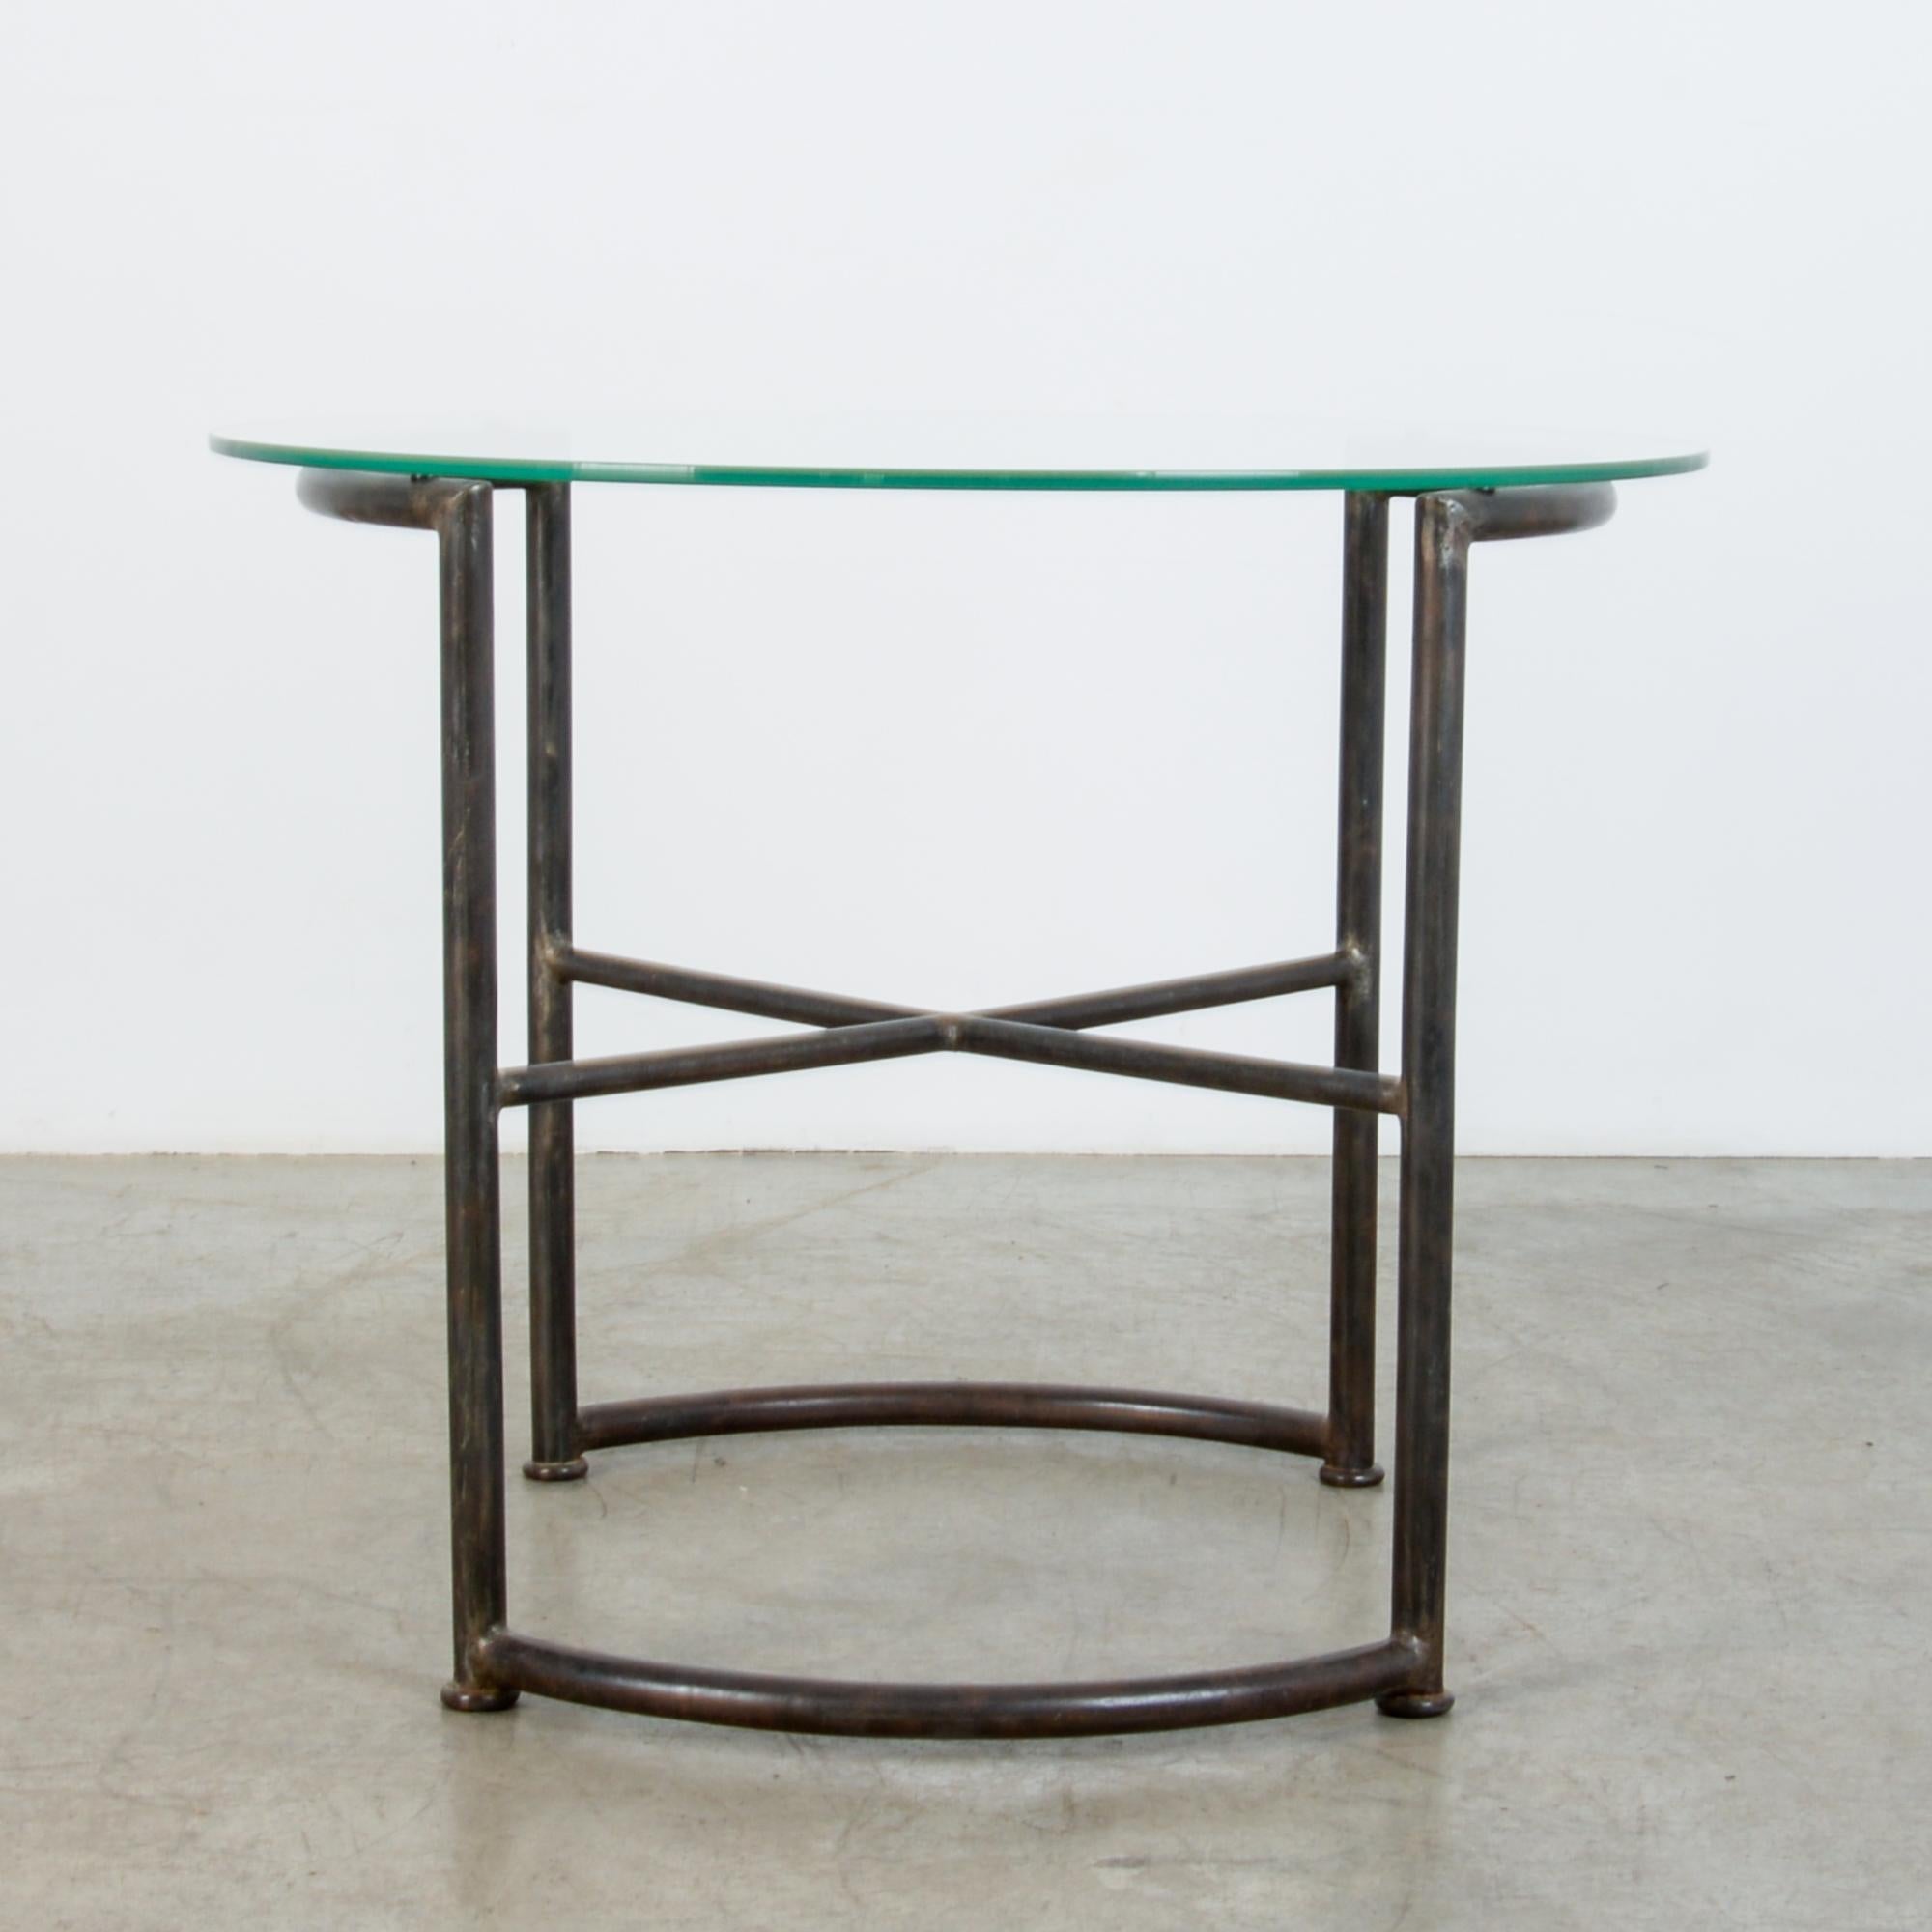 Made in Germany circa 1920, this metal table is realized in typical Bauhaus fashion, with blended geometries, complex yet intelligible. Developing the ubiquitous materials of industry, the now familiar construction from tubular steel was a